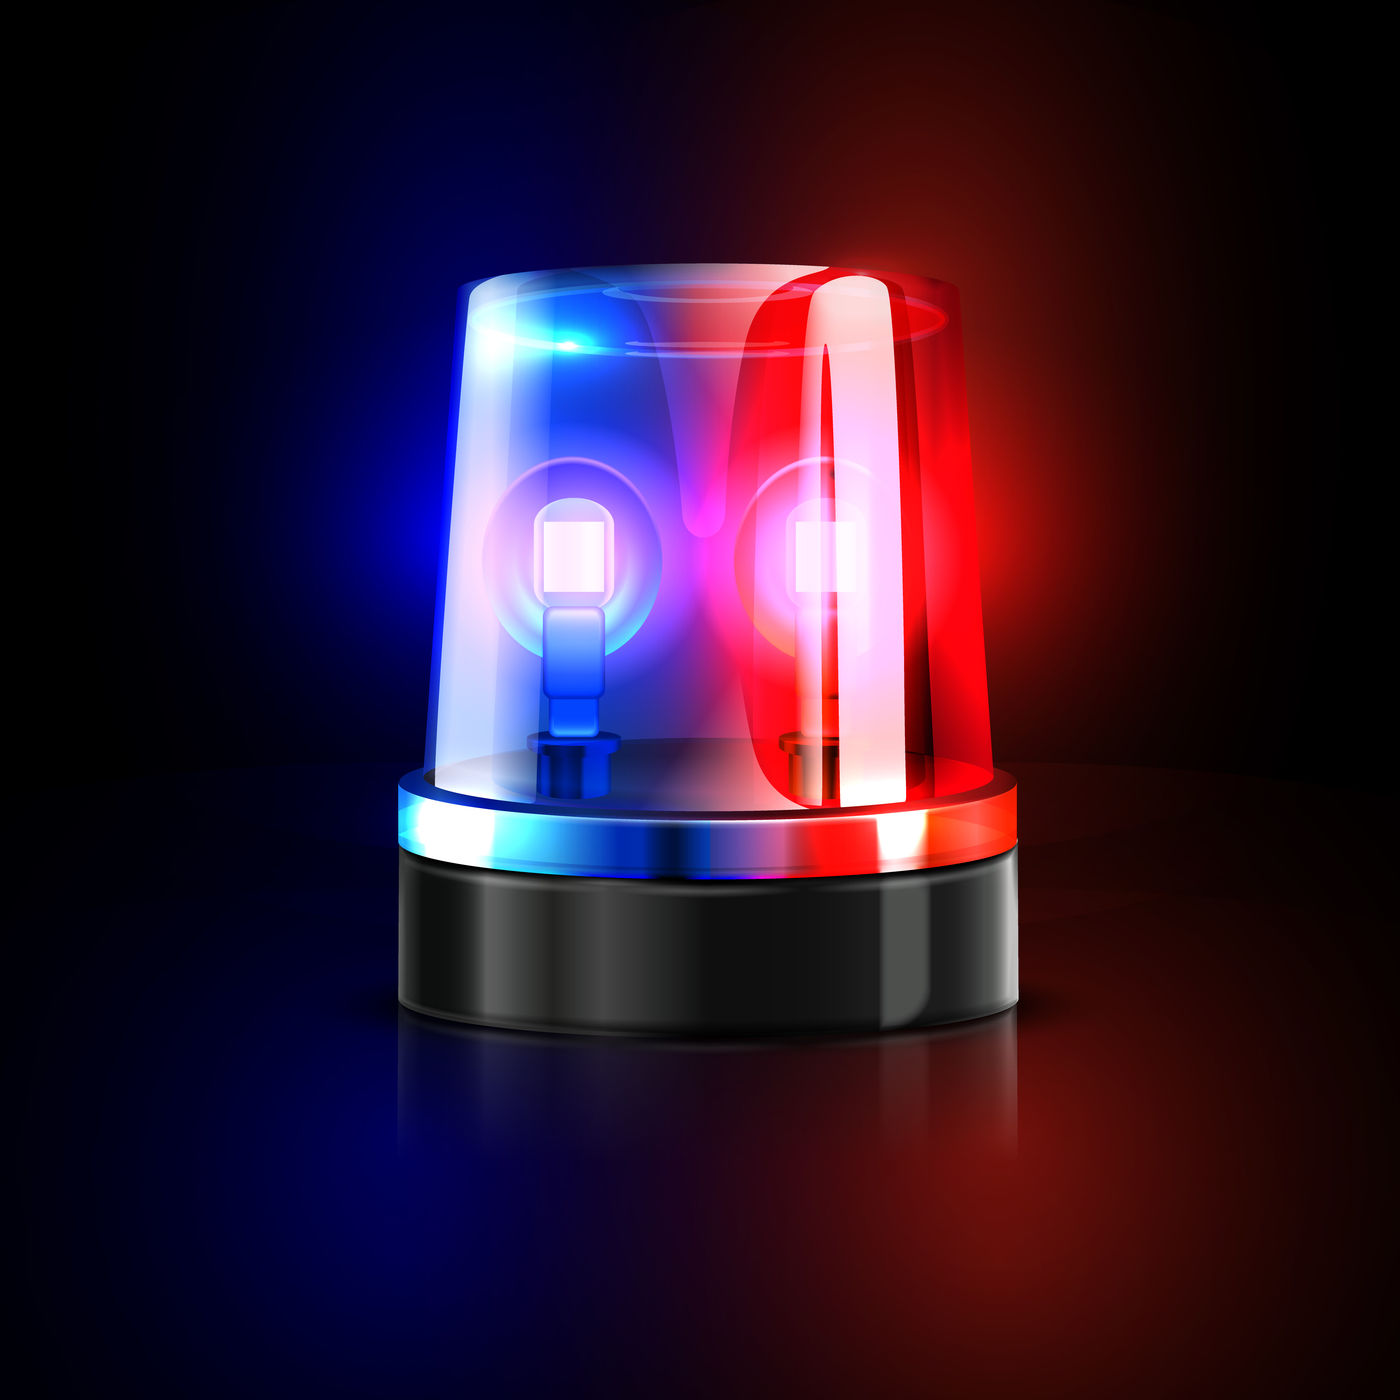 Emergency flashing police siren vector illustration By Microvector